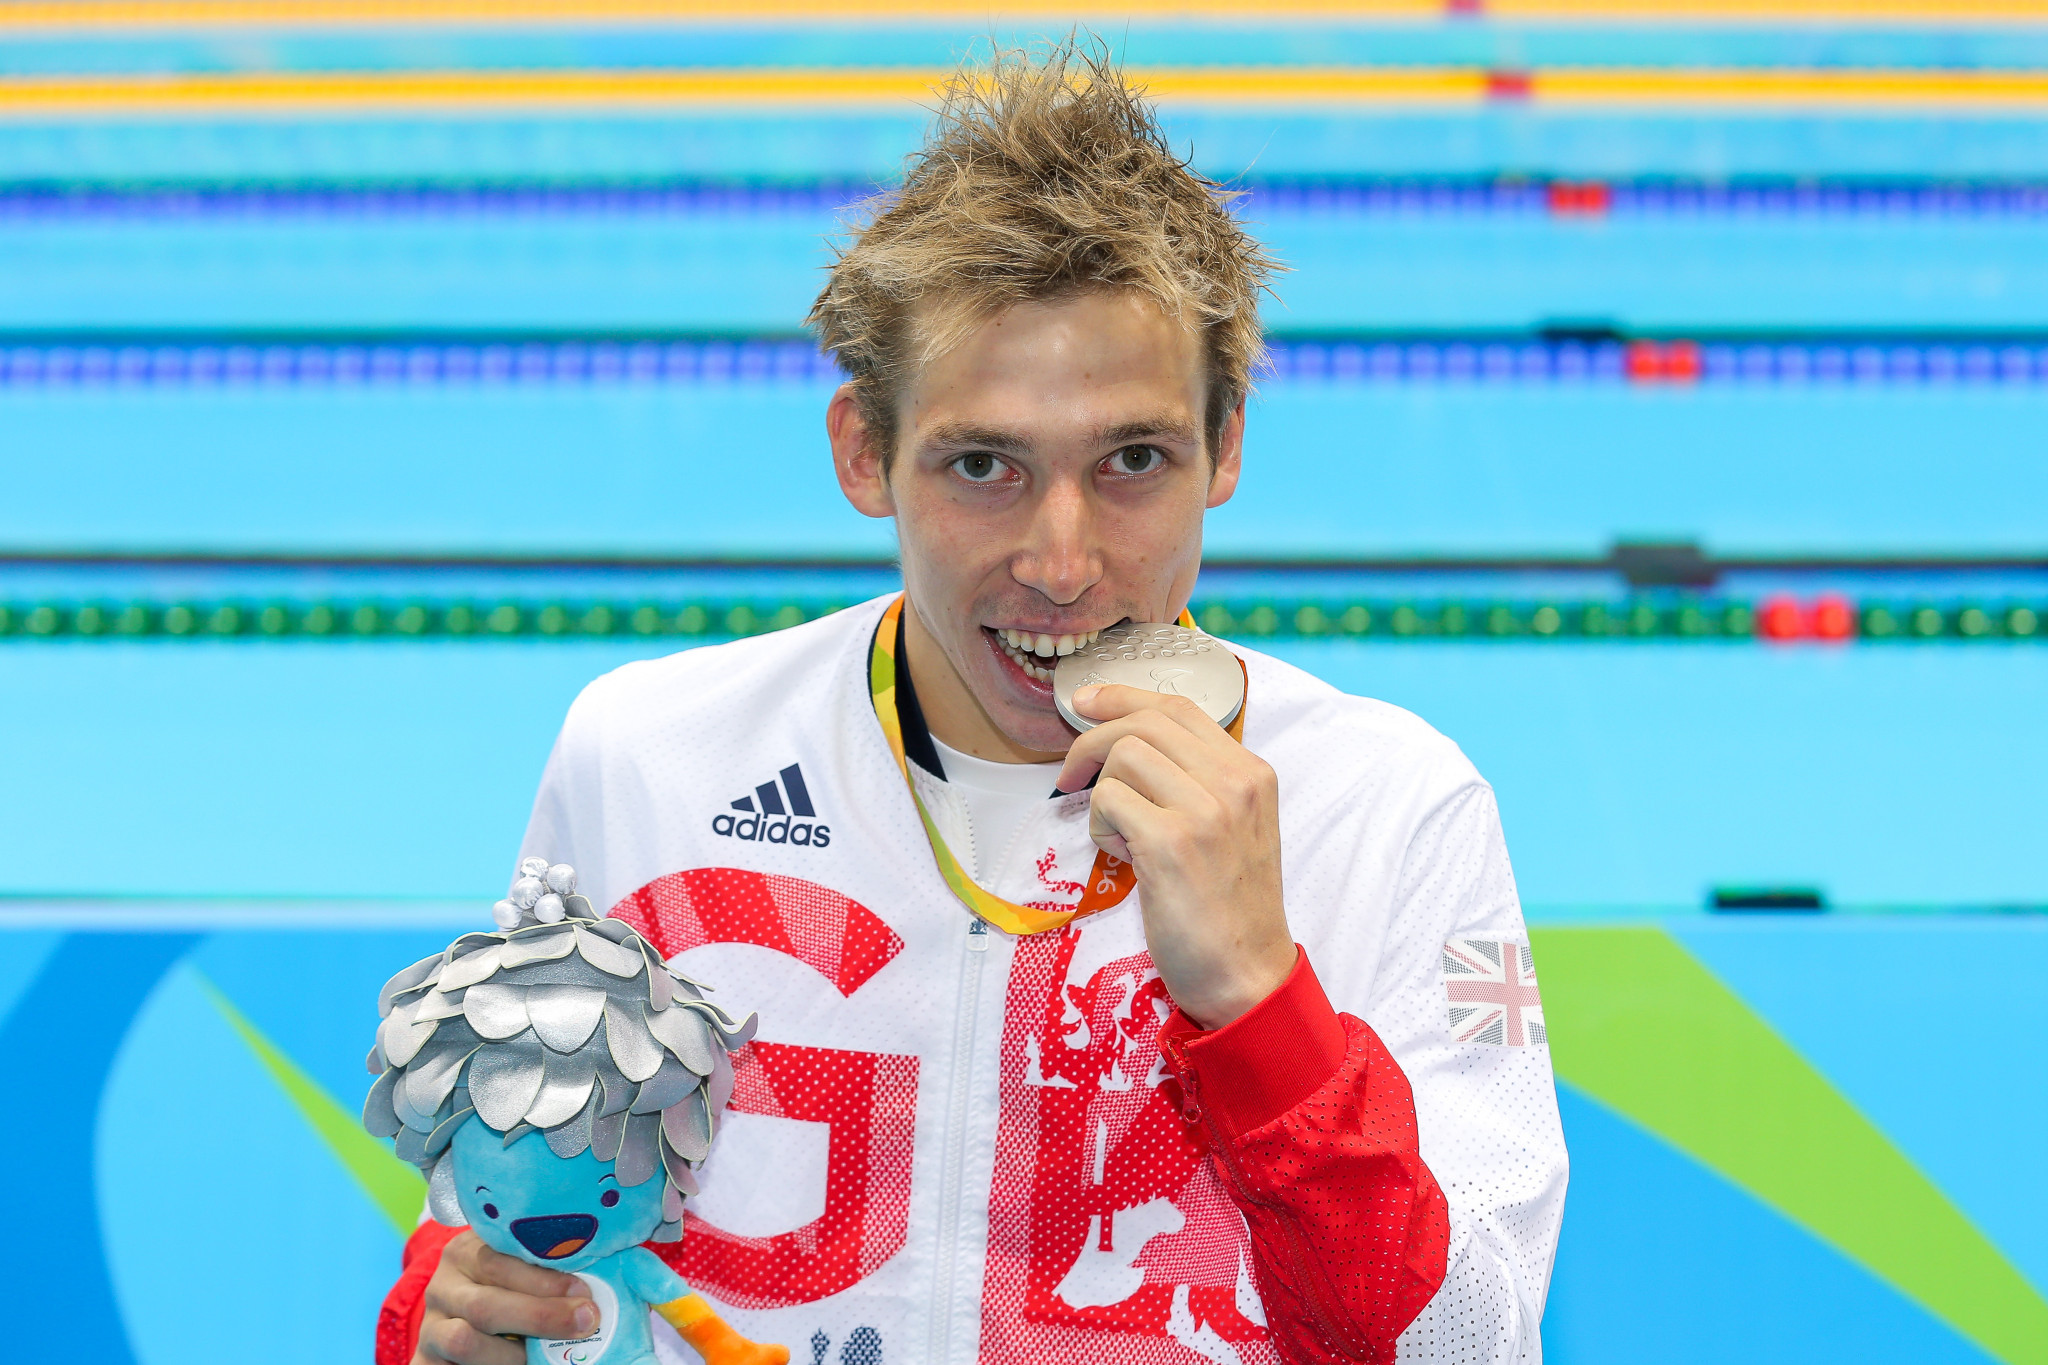 Former Paralympic champion retires from swimming after claiming reclassification was "degrading"